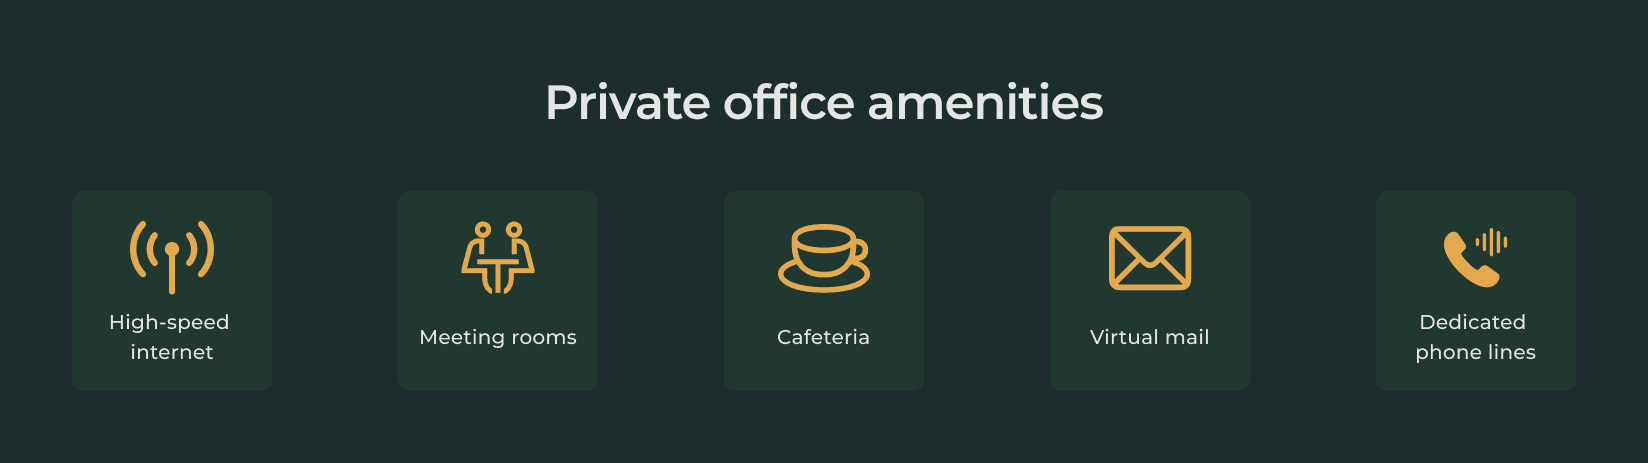 Private office amenities